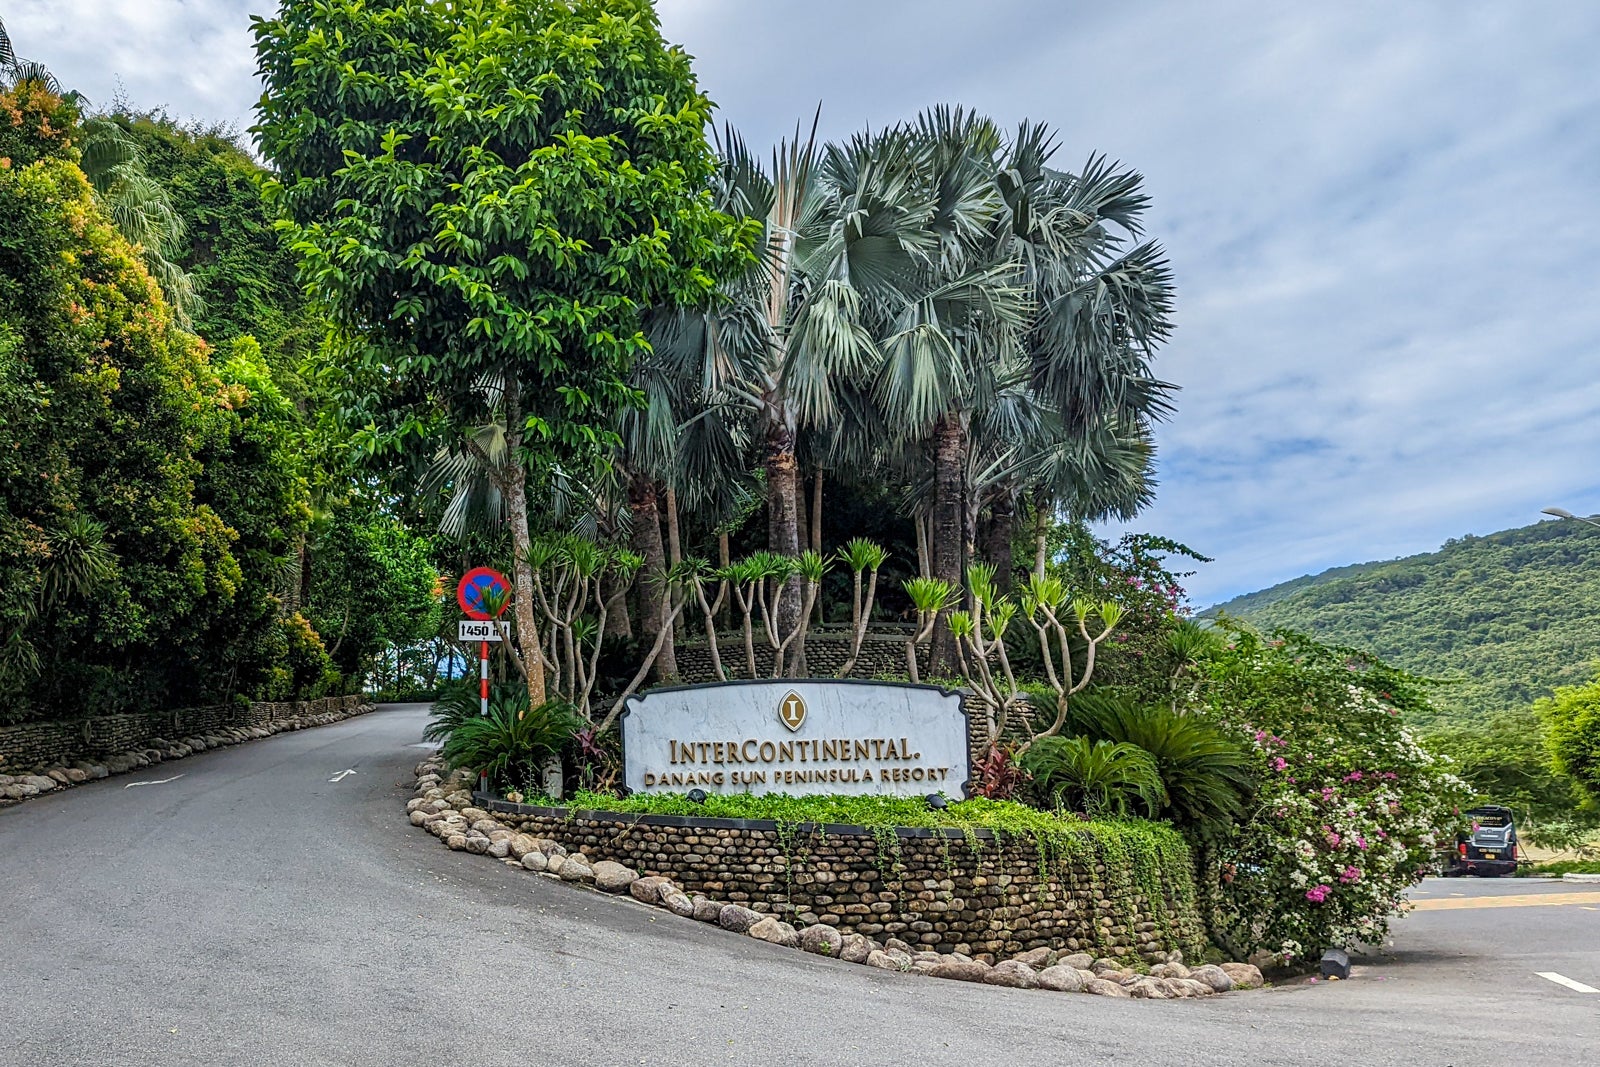 Entrance sign for the InterContinental Danang